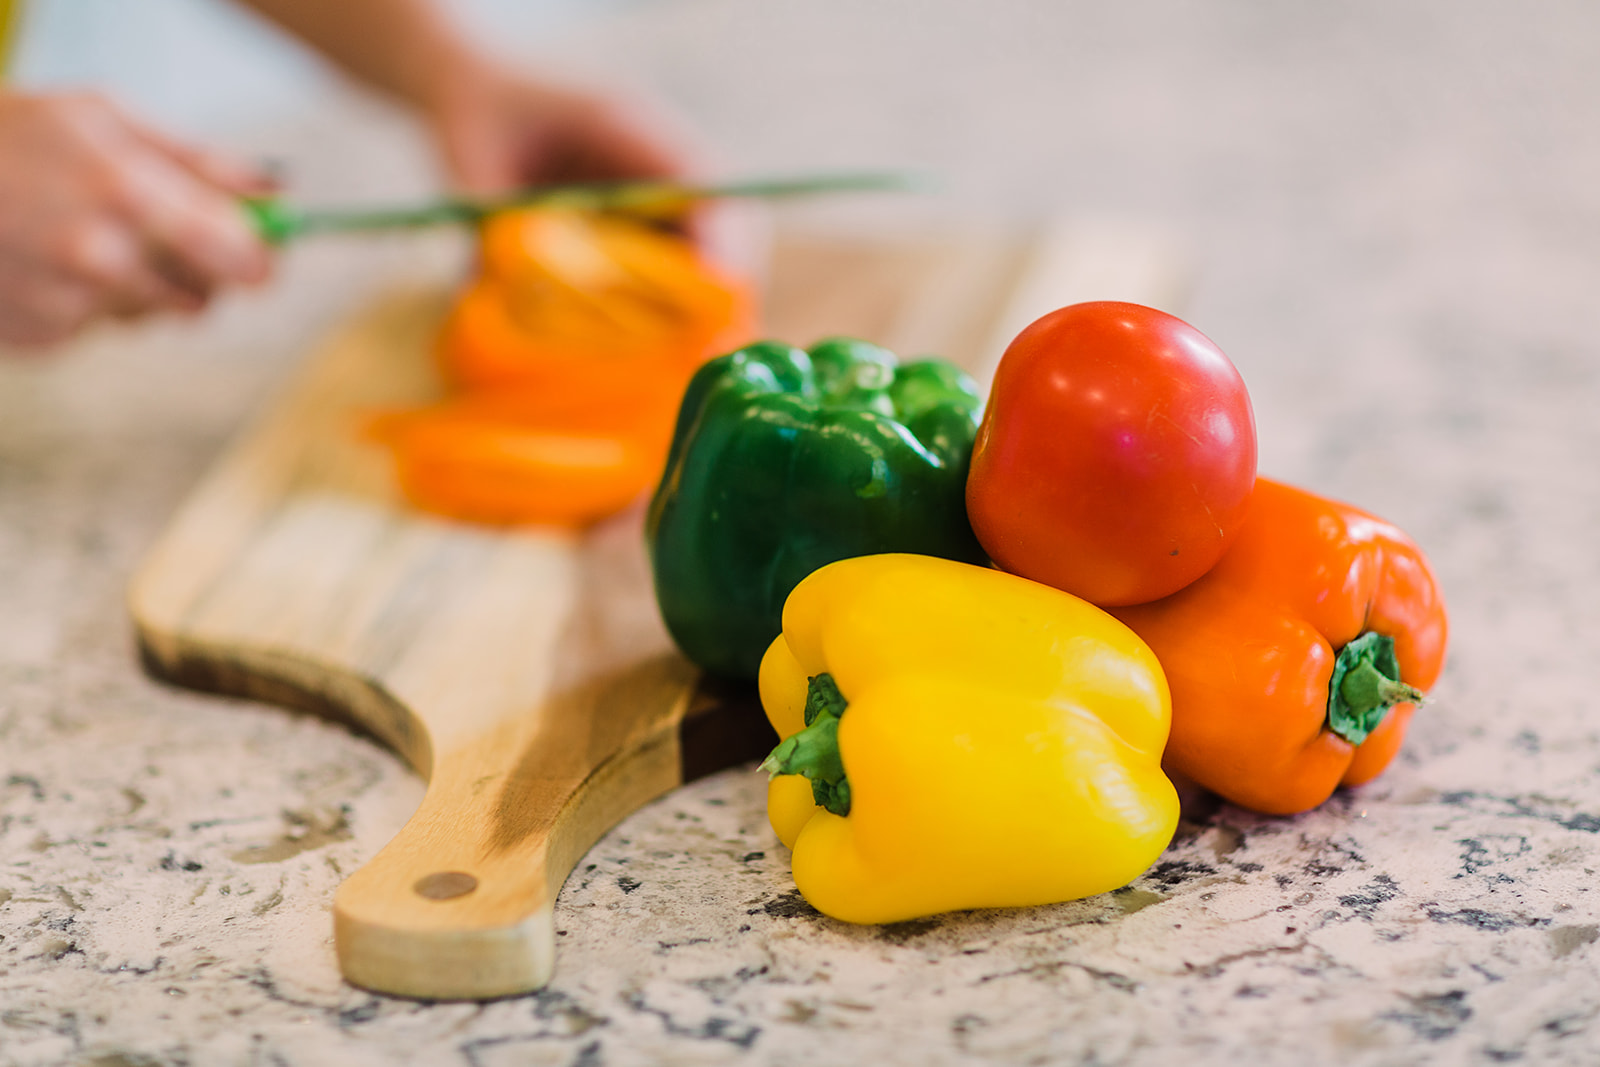 Red, green, yellow, and orange peppers in the foreground. Jen Lyman, dietitian at New Leaf Nutrition, cuts an orange pepper on a wooden cutting board in the background